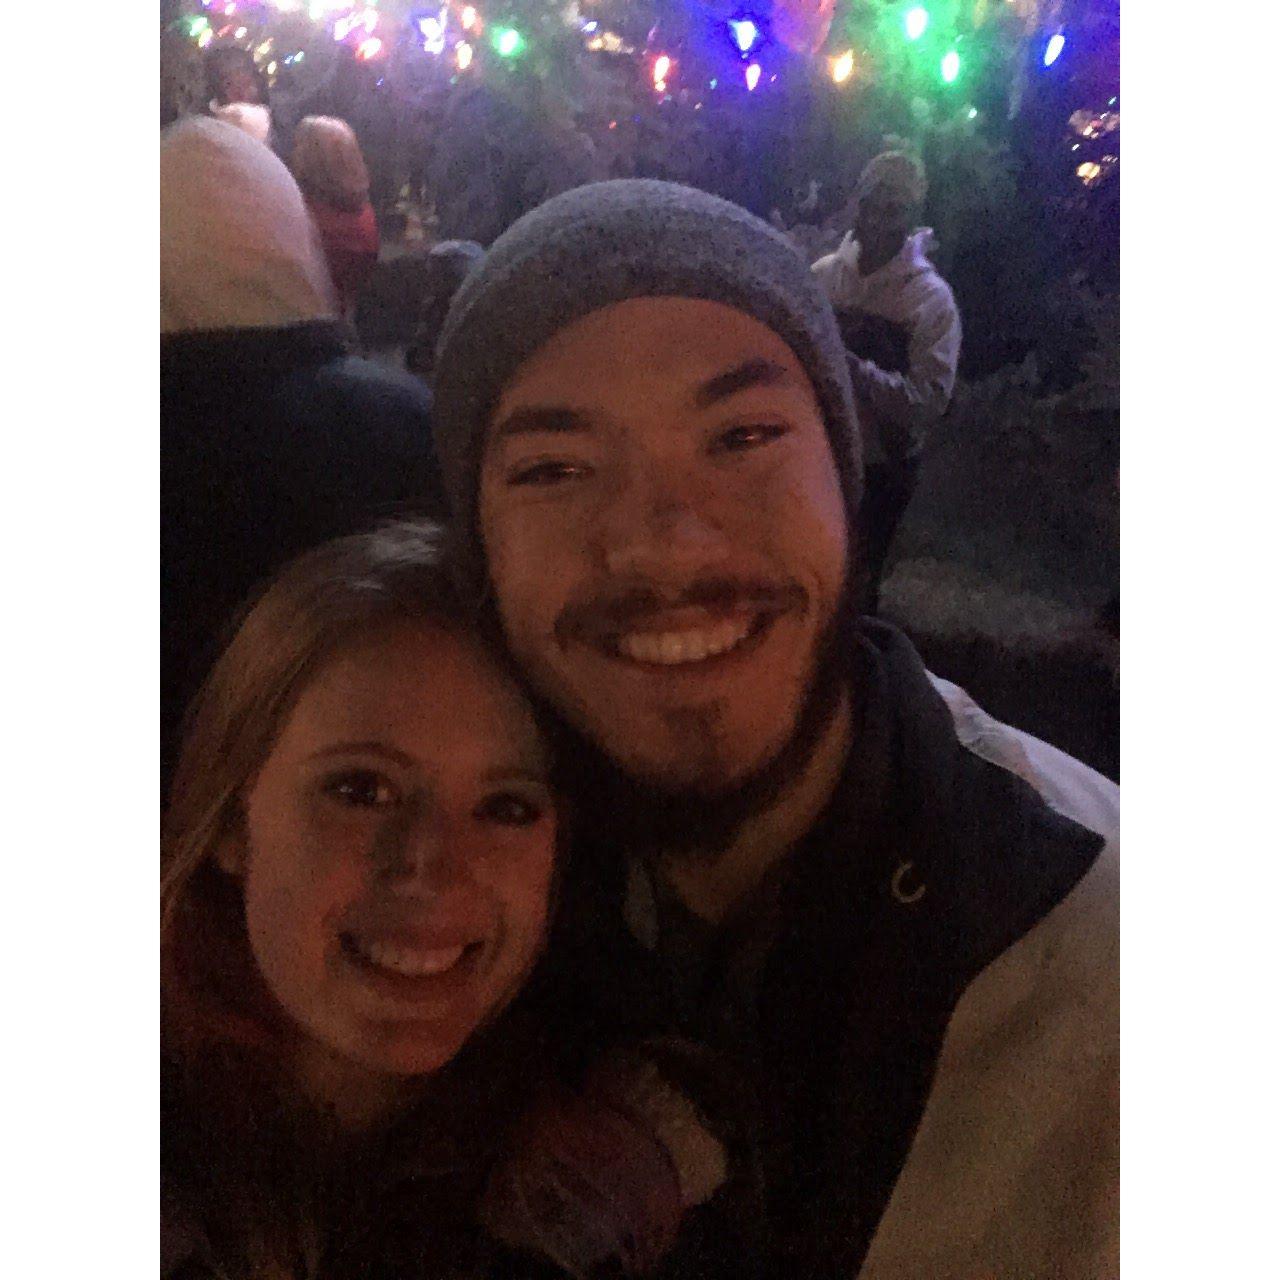 Right before the Christmas of 2017! We had only been dating 2 months.